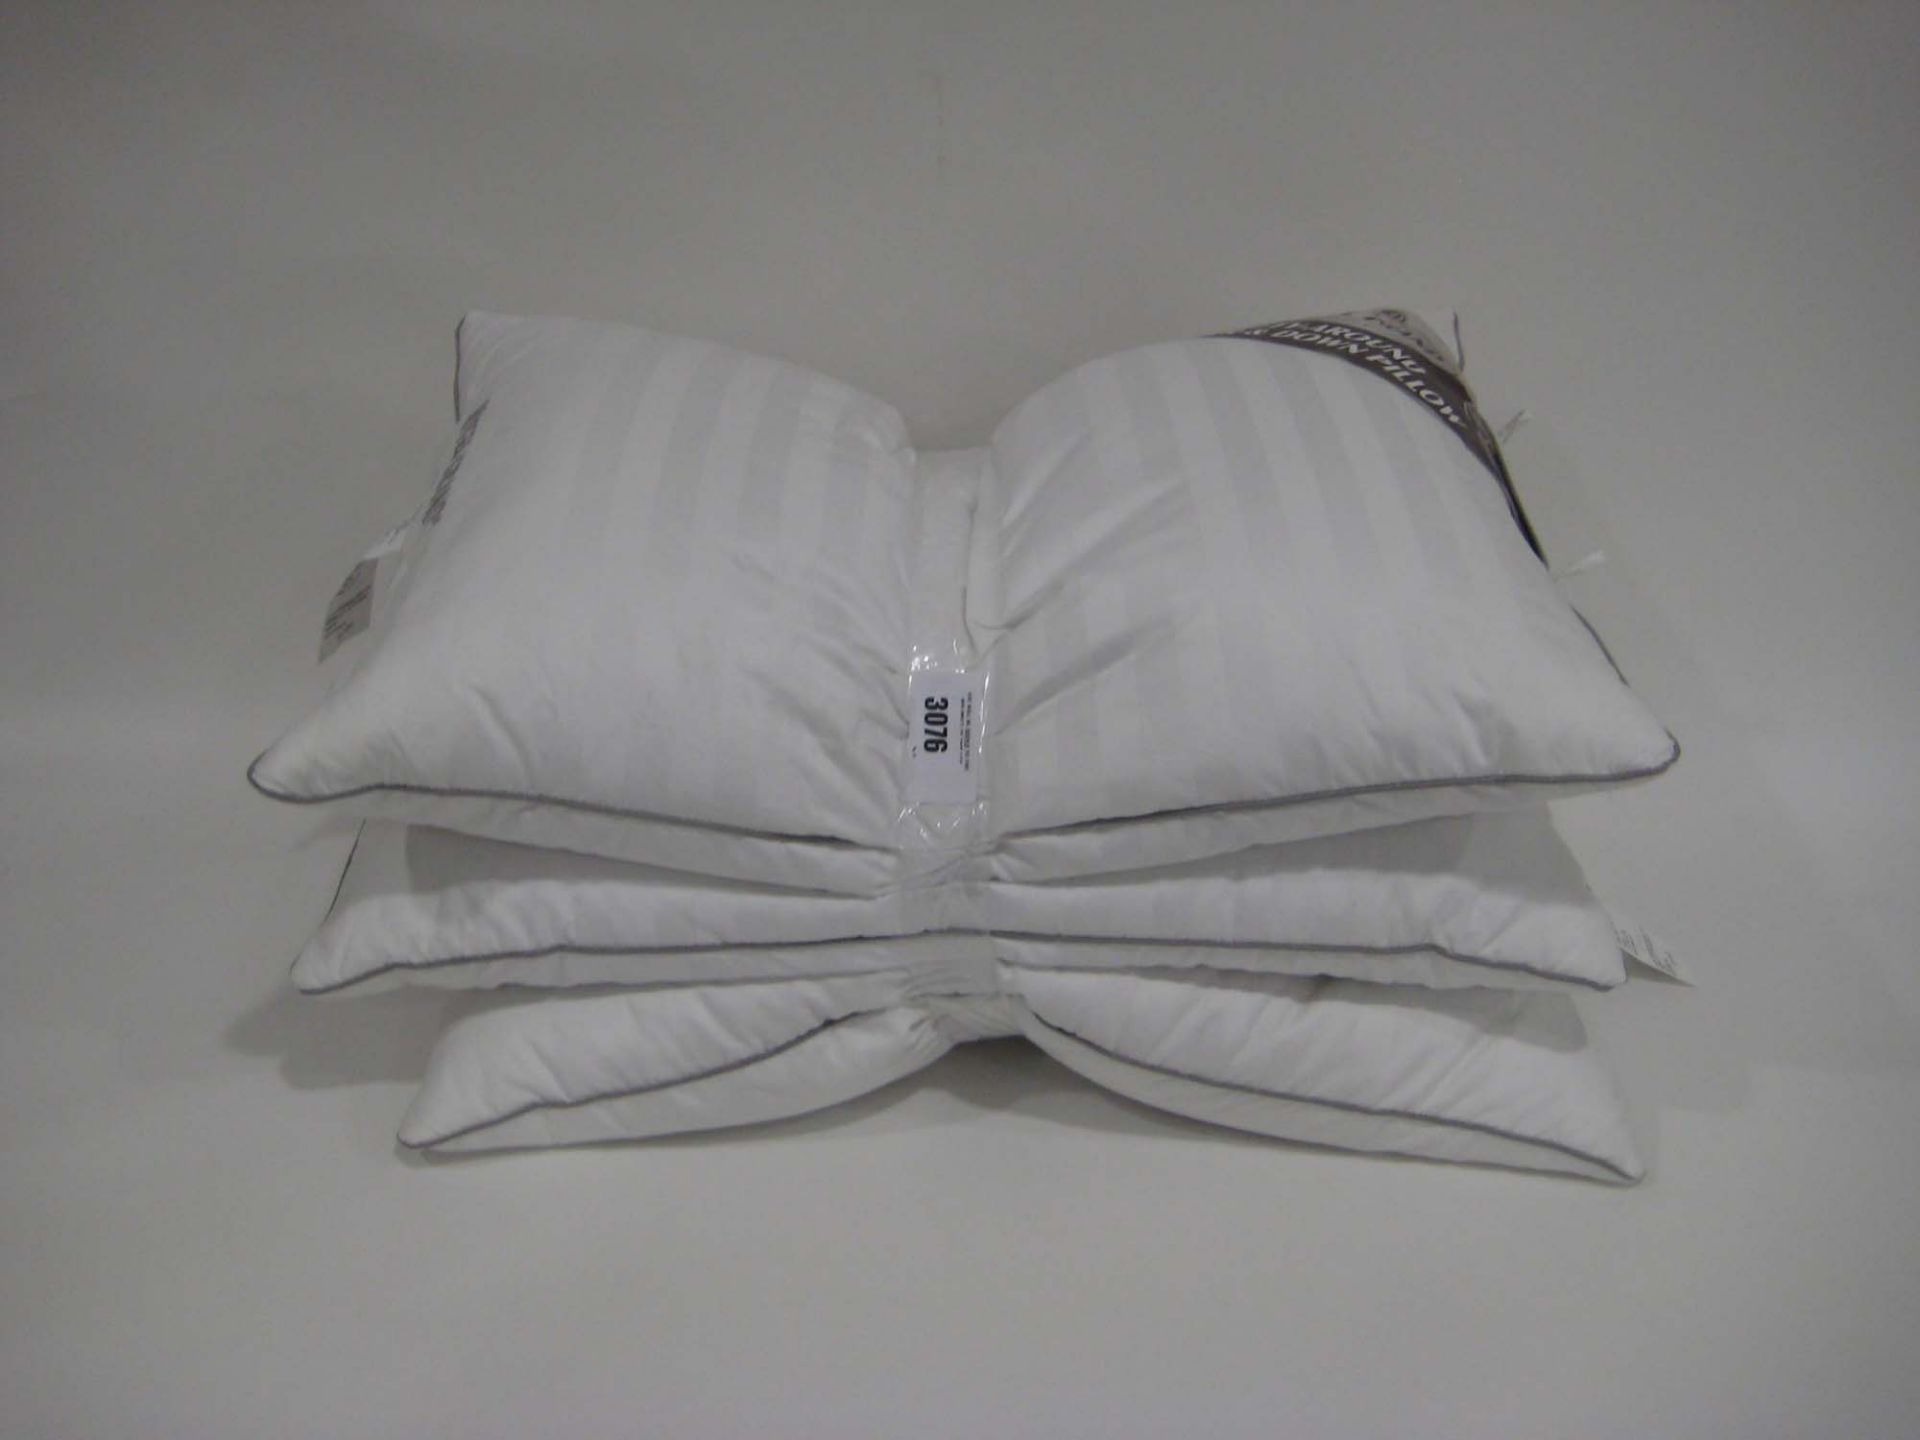 3 Hotel Grand pillows (unbagged)